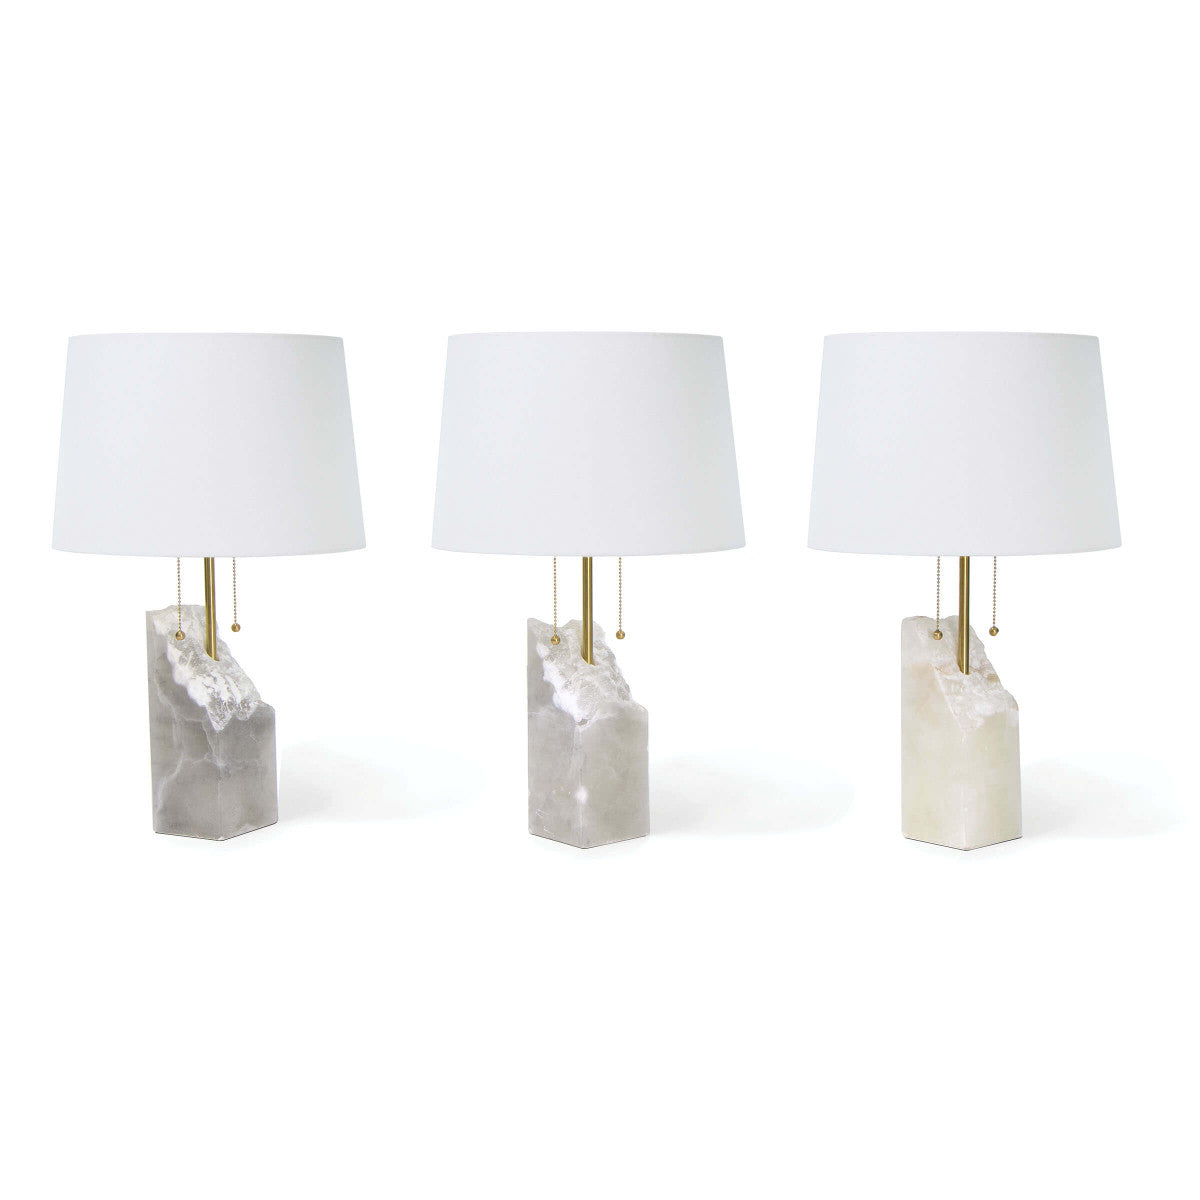 three of the lamps shown side-by-side to show natural color variations